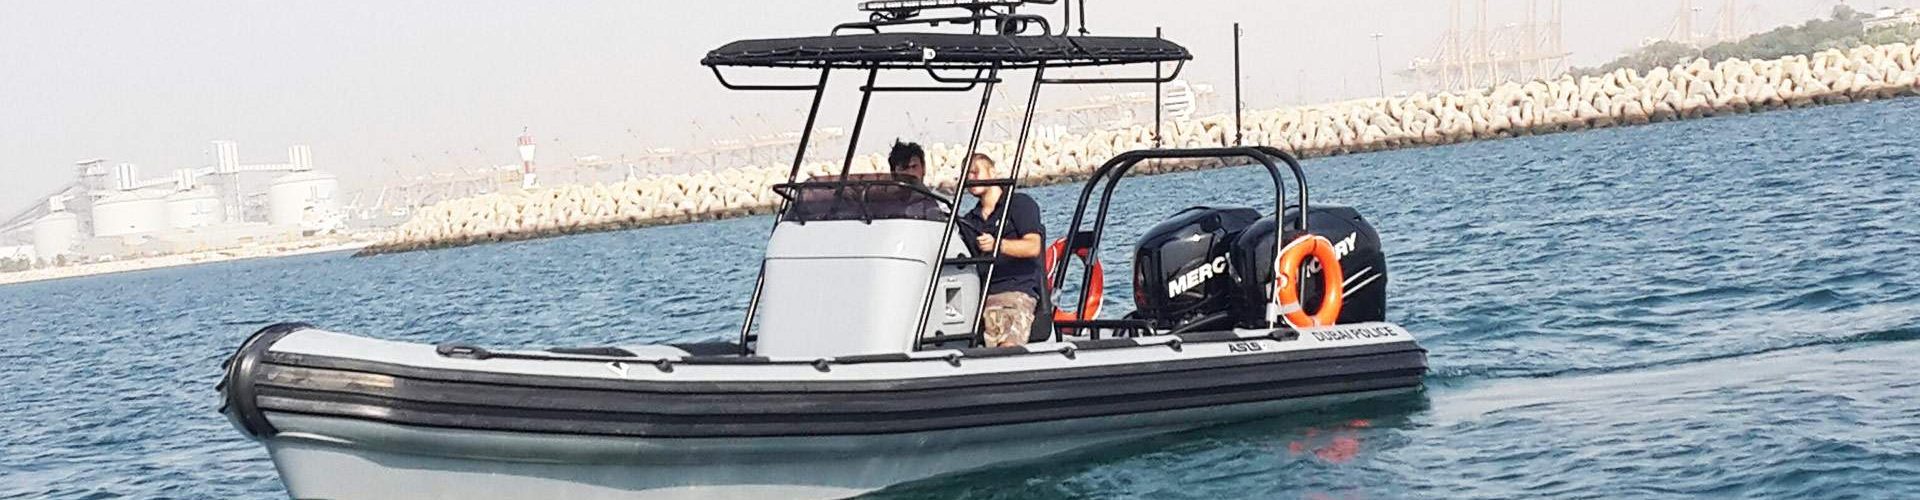 Police SWAT Boats